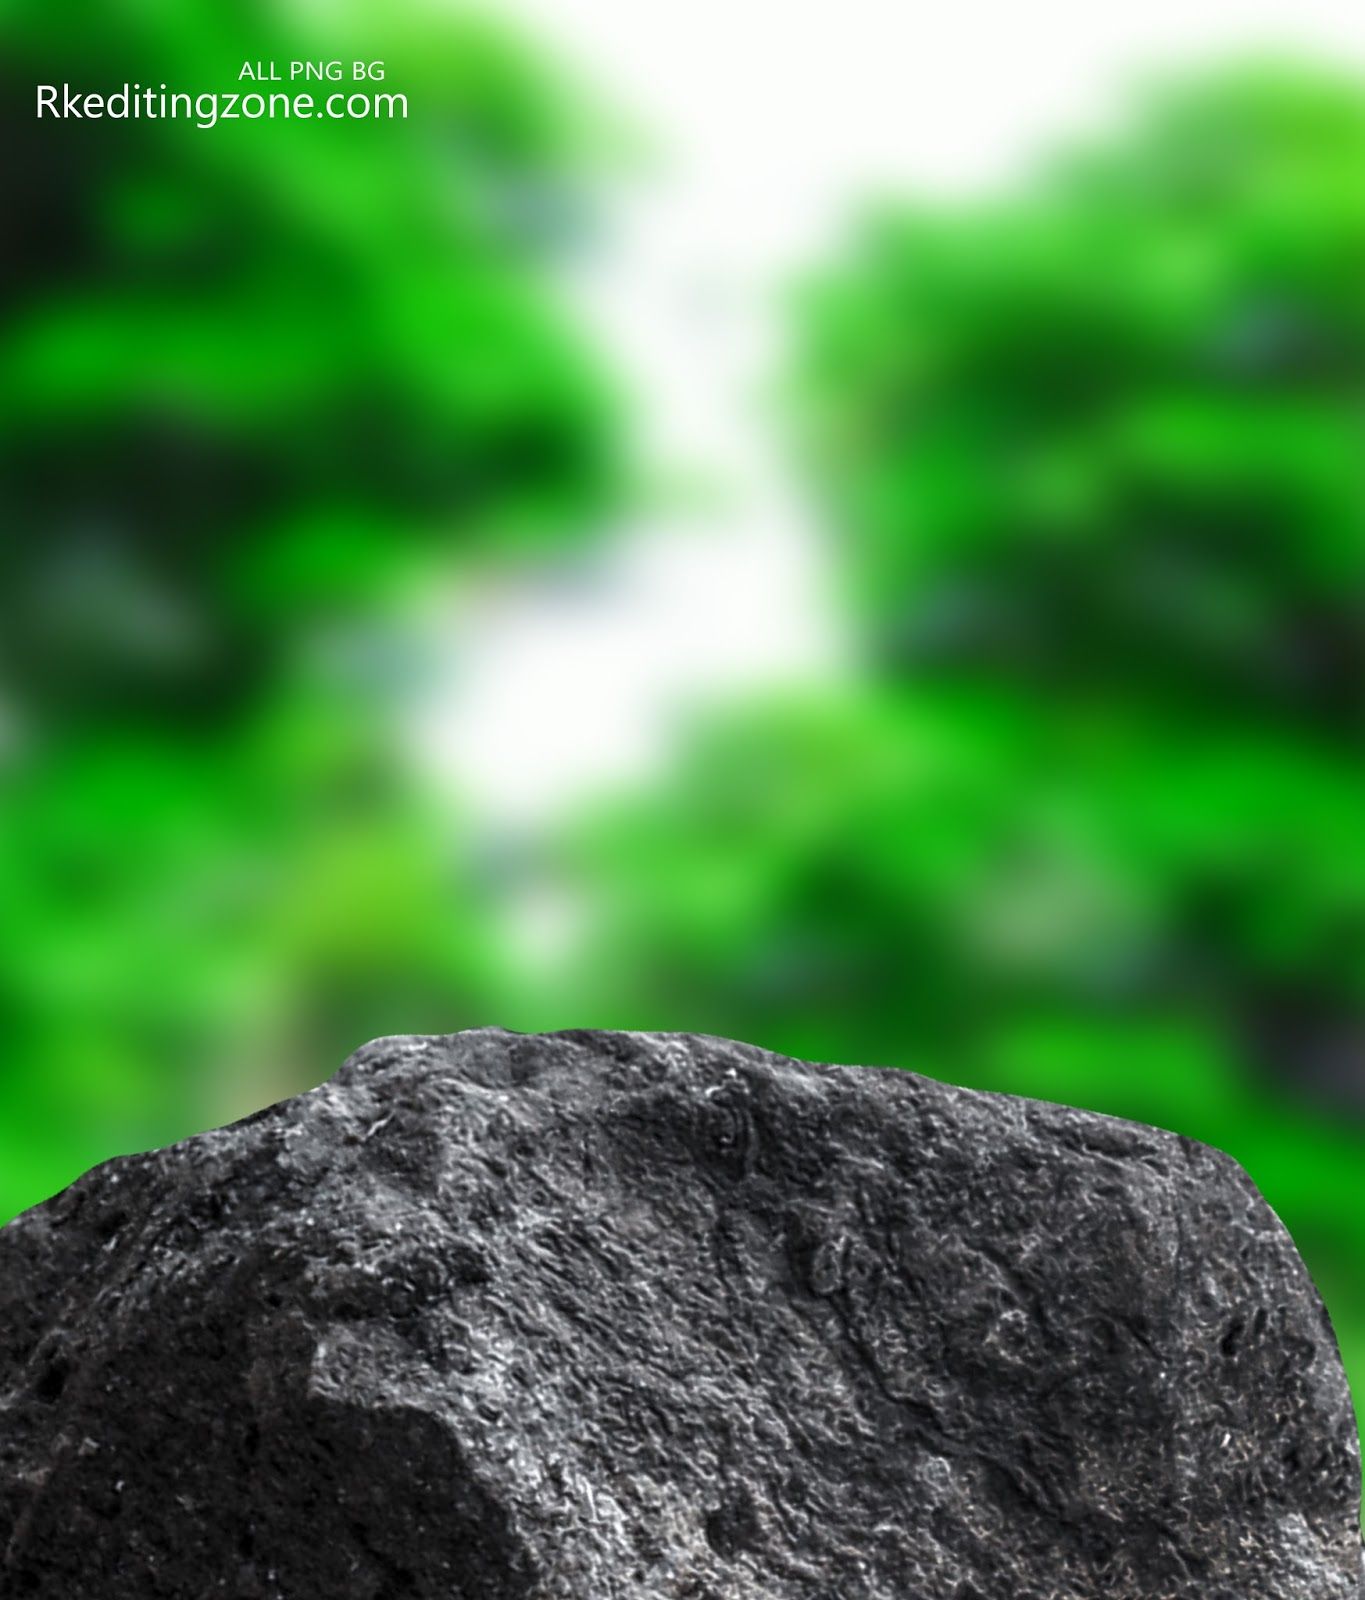 hd wallpapers for editing,green,nature,rock,tree,grass